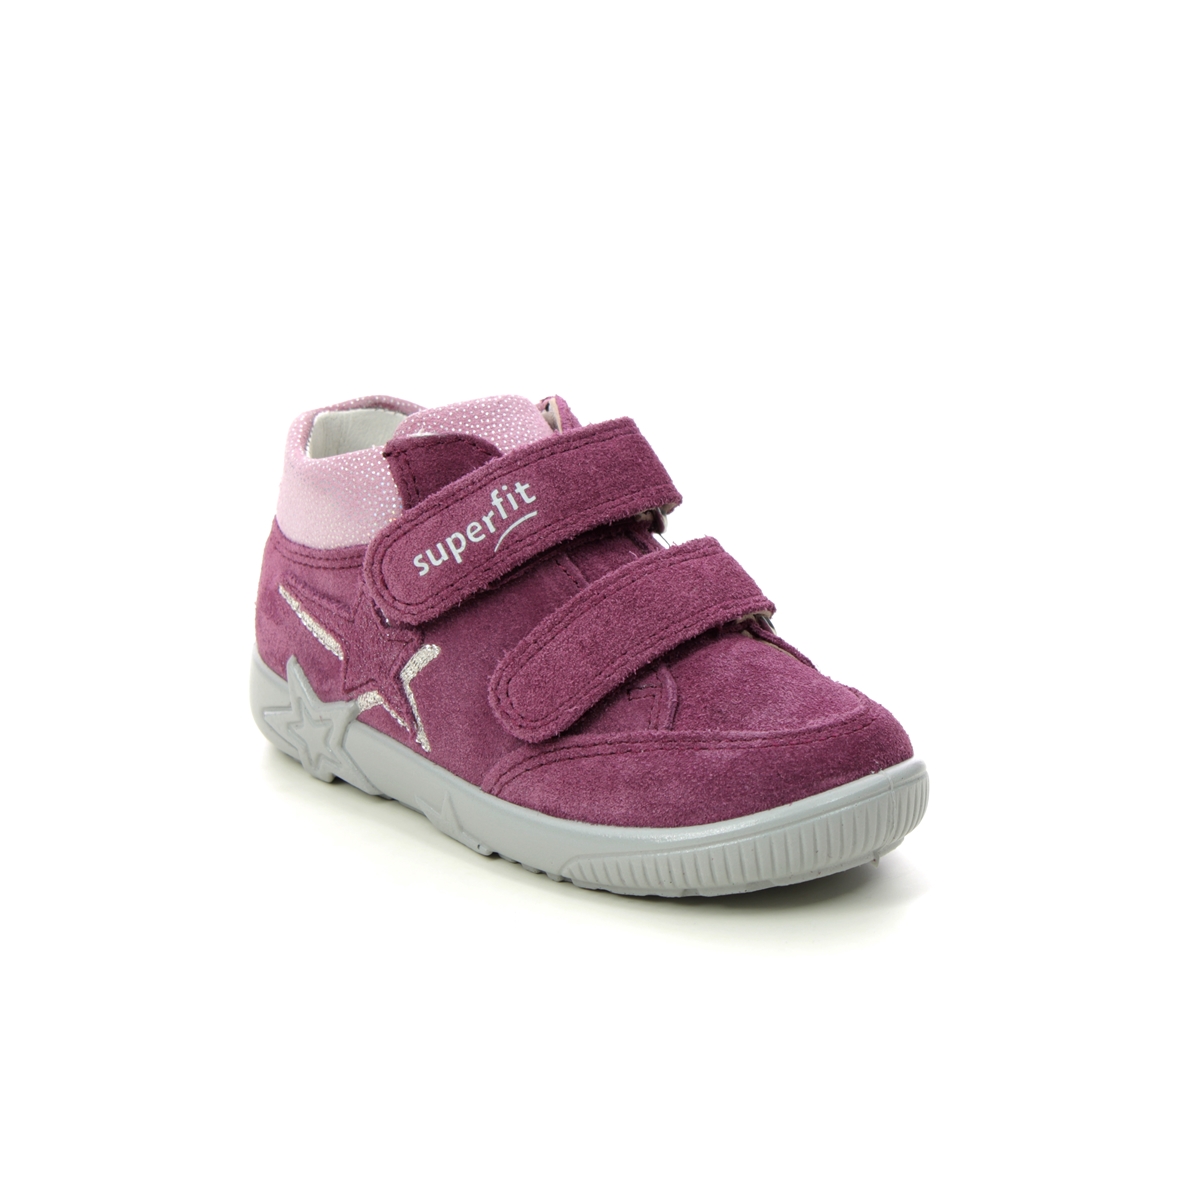 Superfit Starlight Ht 2V Pink Suede Kids First Shoes 1006443-5510 In Size 23 In Plain Pink Suede